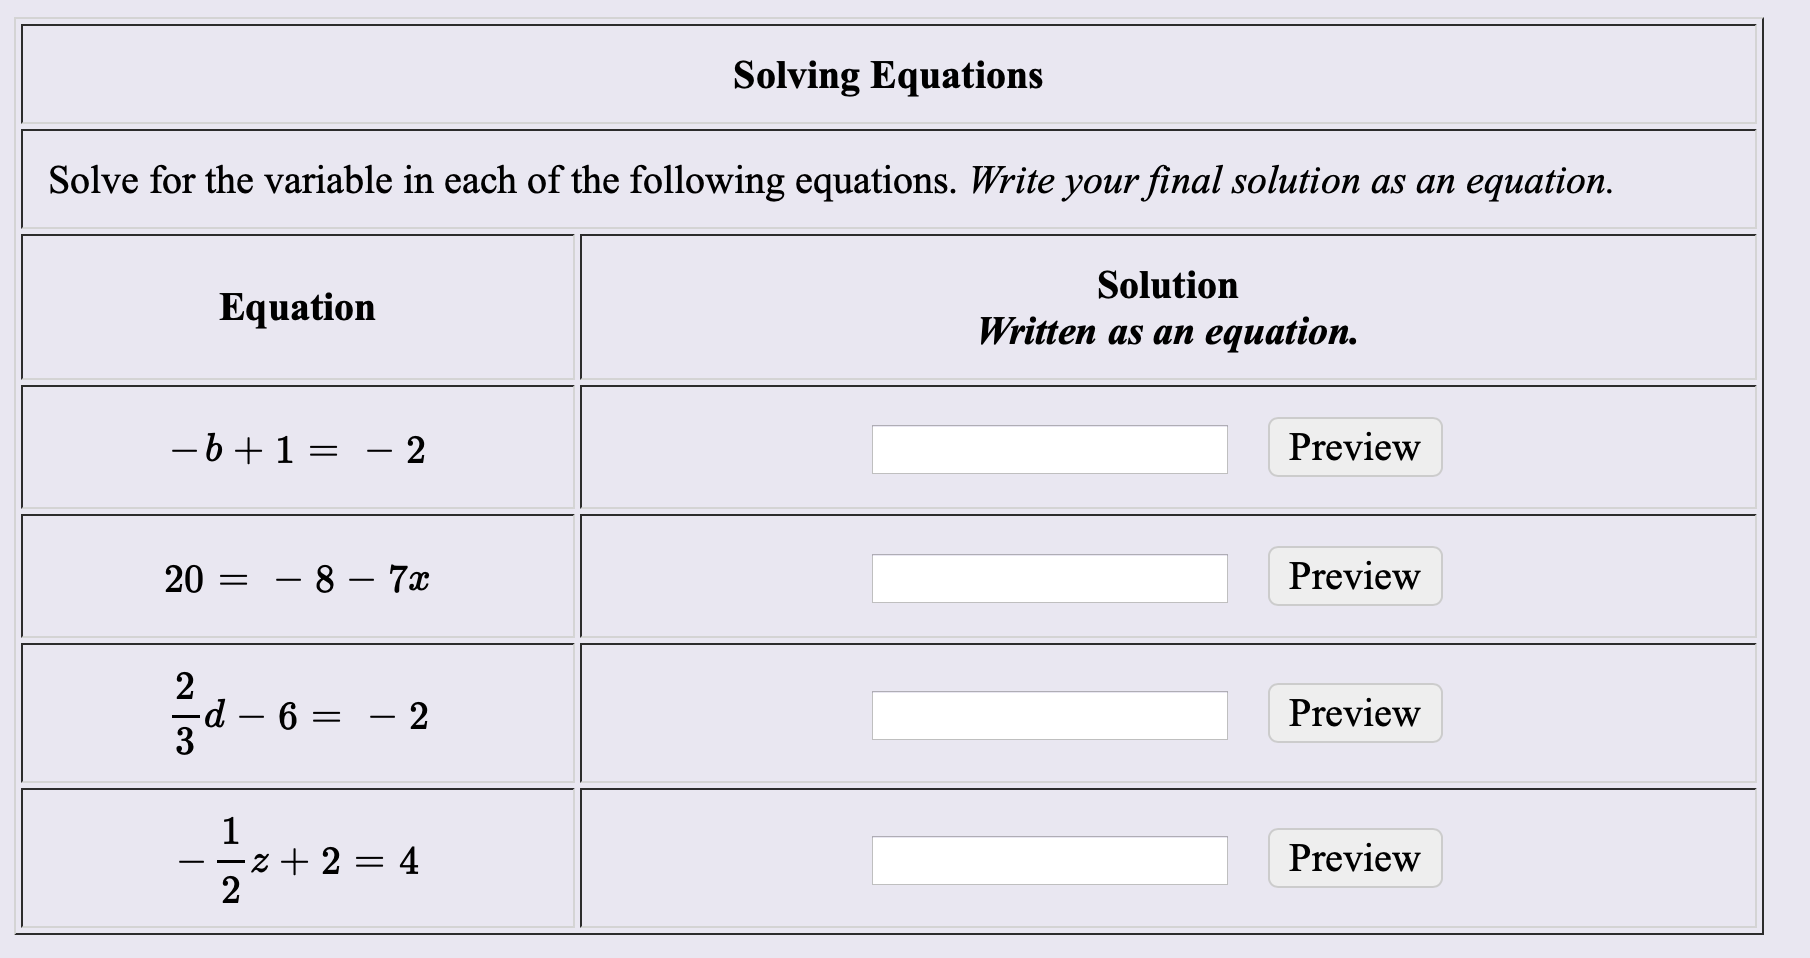 Solving Equations
Solve for the variable in each of the following equations. Write your final solution as an equation
Solution
Equation
Written as an
equation.
-b 1 =
Preview
2
Preview
- 8 - 7x
20
2
d
- 2
Preview
6
1
z 2 = 4
2
Preview
